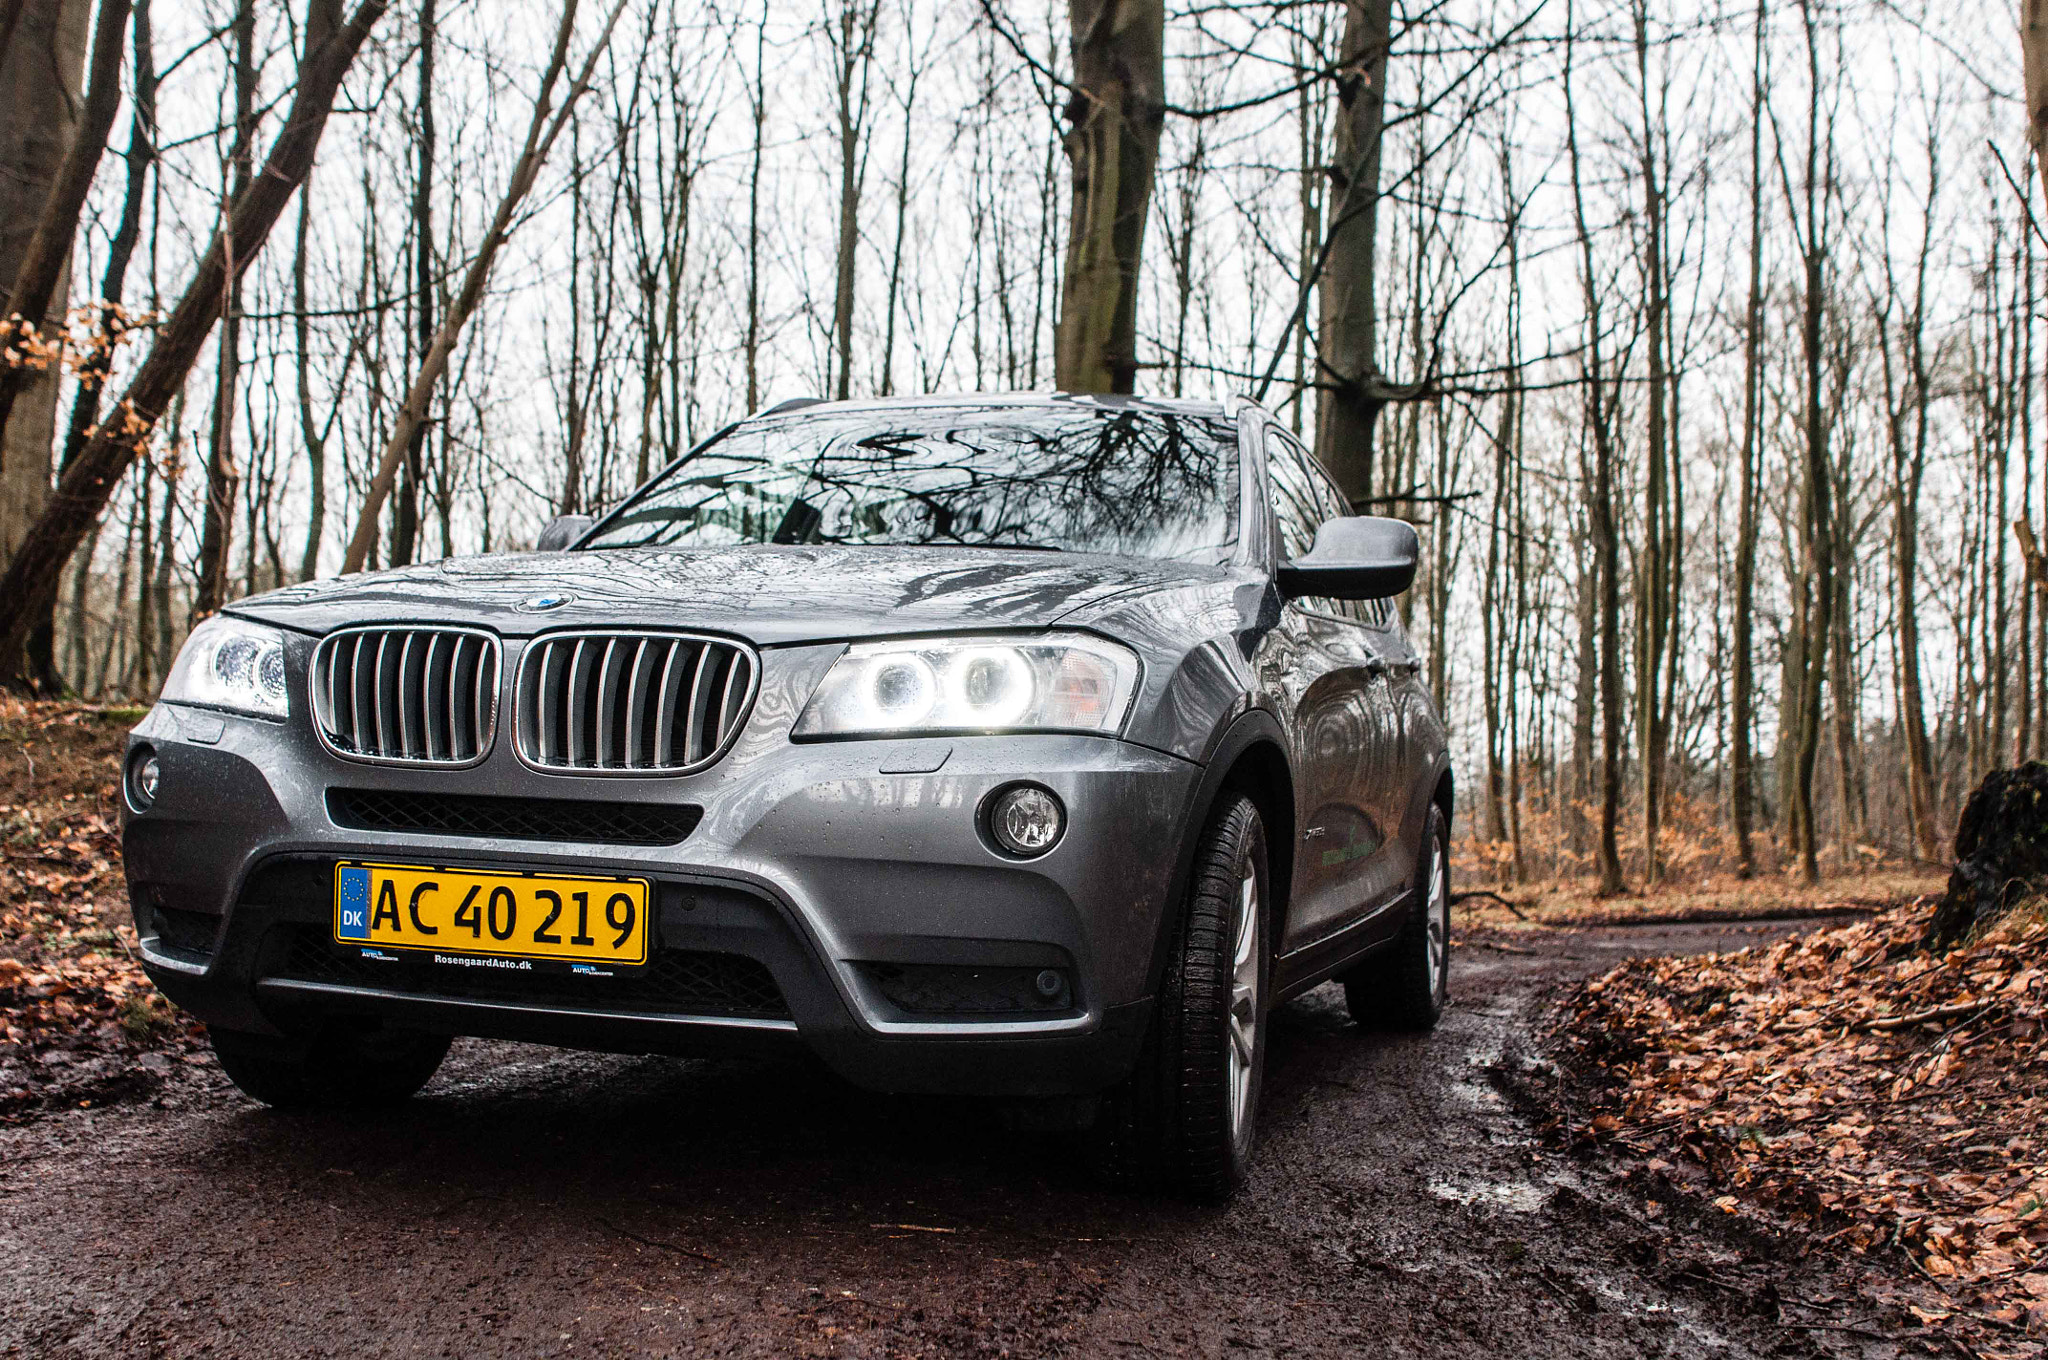 Nikon D90 sample photo. Bmw x3 in it's element photography